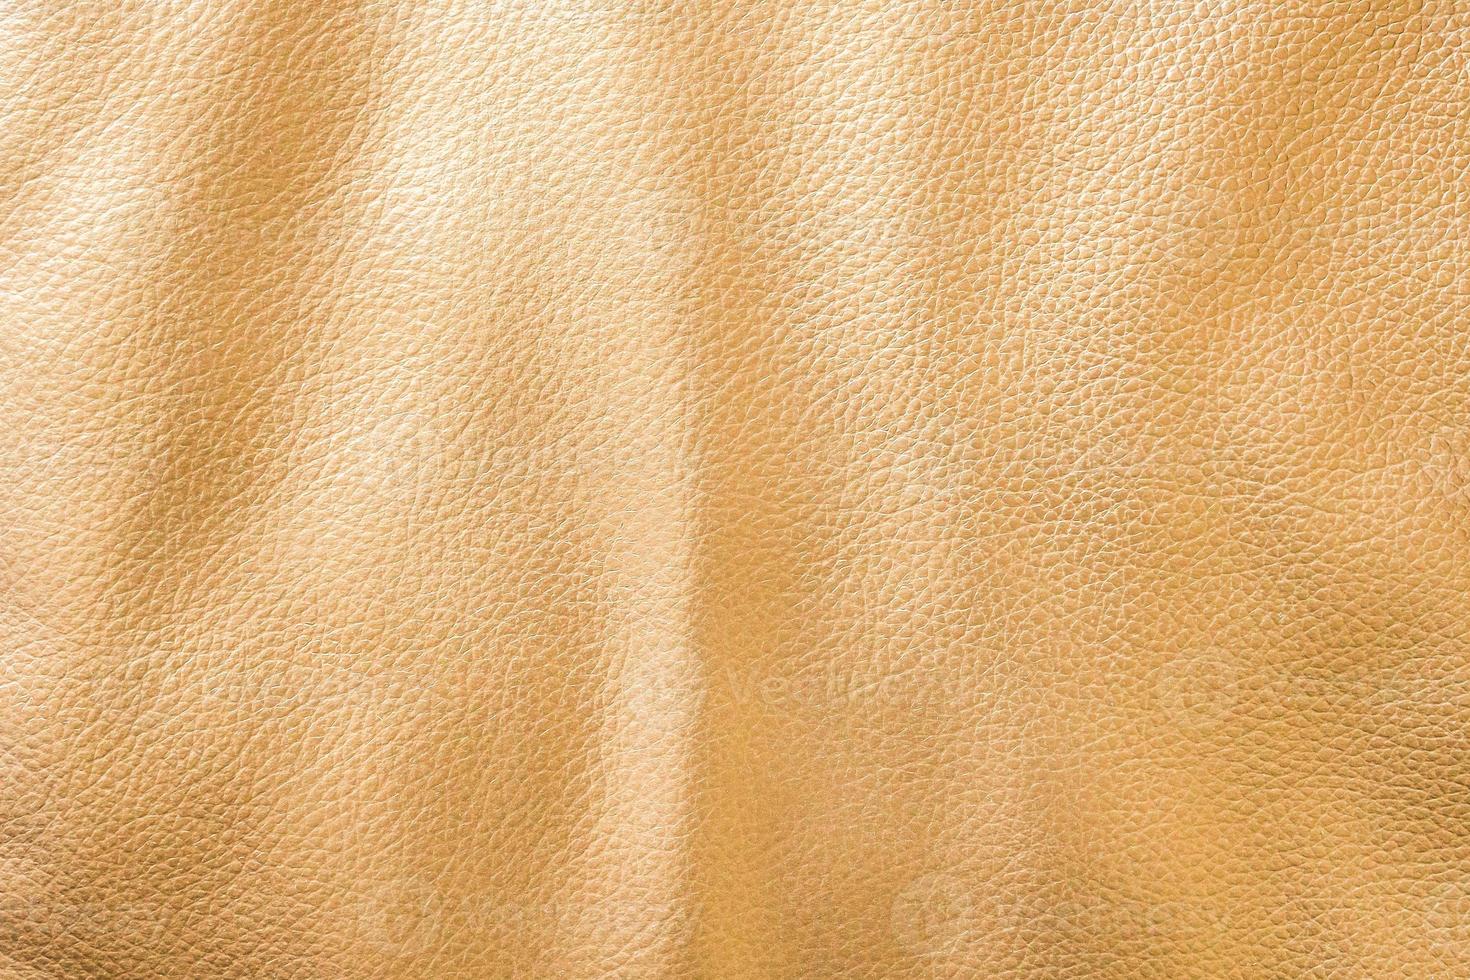 Luxury leather texture surface background 13020535 Stock Photo at Vecteezy